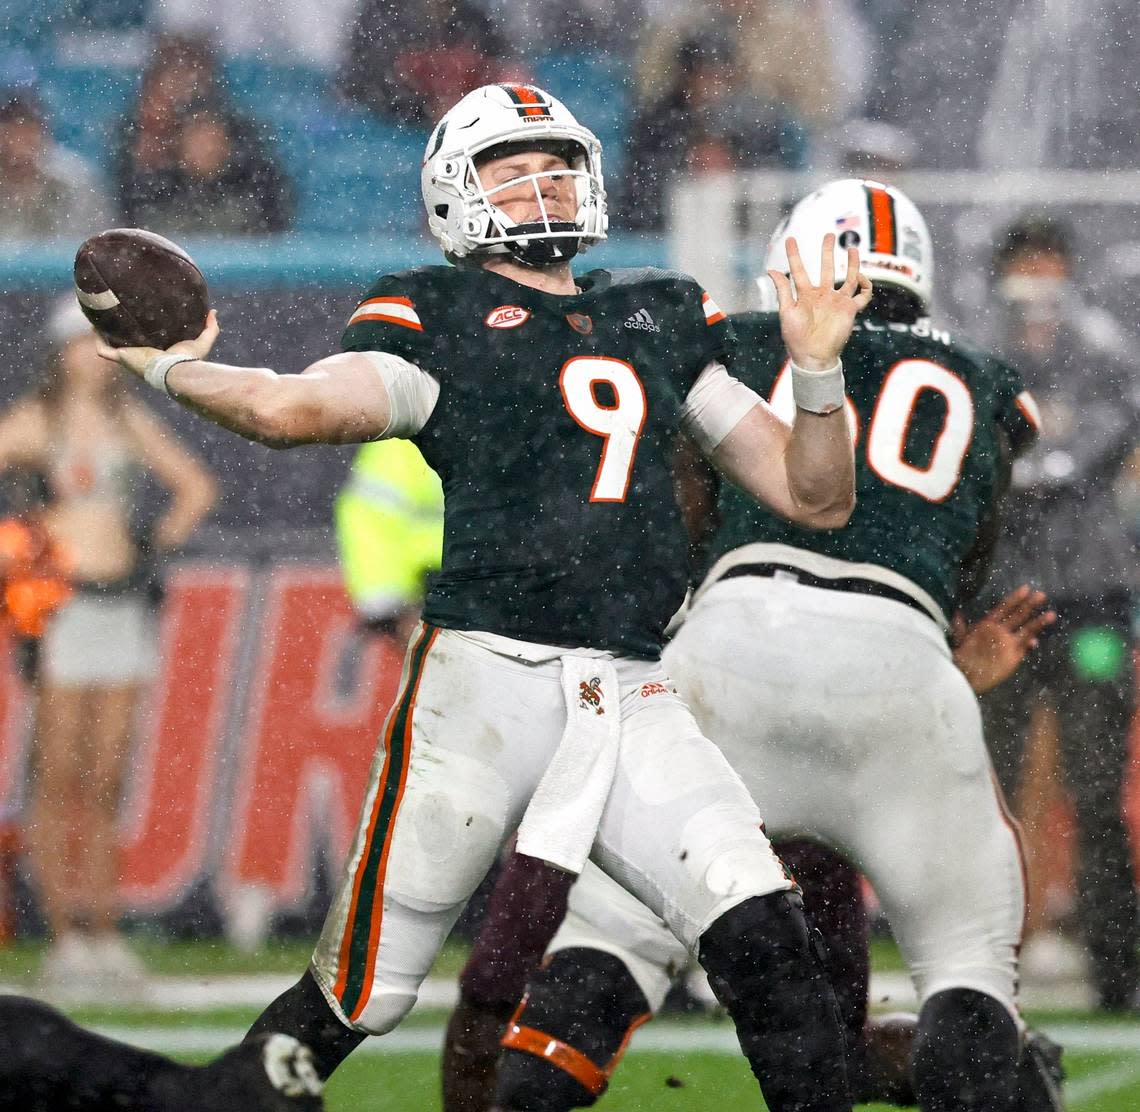 Miami Hurricanes quarterback Tyler Van Dyke (9) sets up to pass during the fourth quarter of their ACC football game against the Virginia Tech Hockies at Hard Rock Stadium on Saturday, November 20, 2021 in Miami Gardens, Florida.